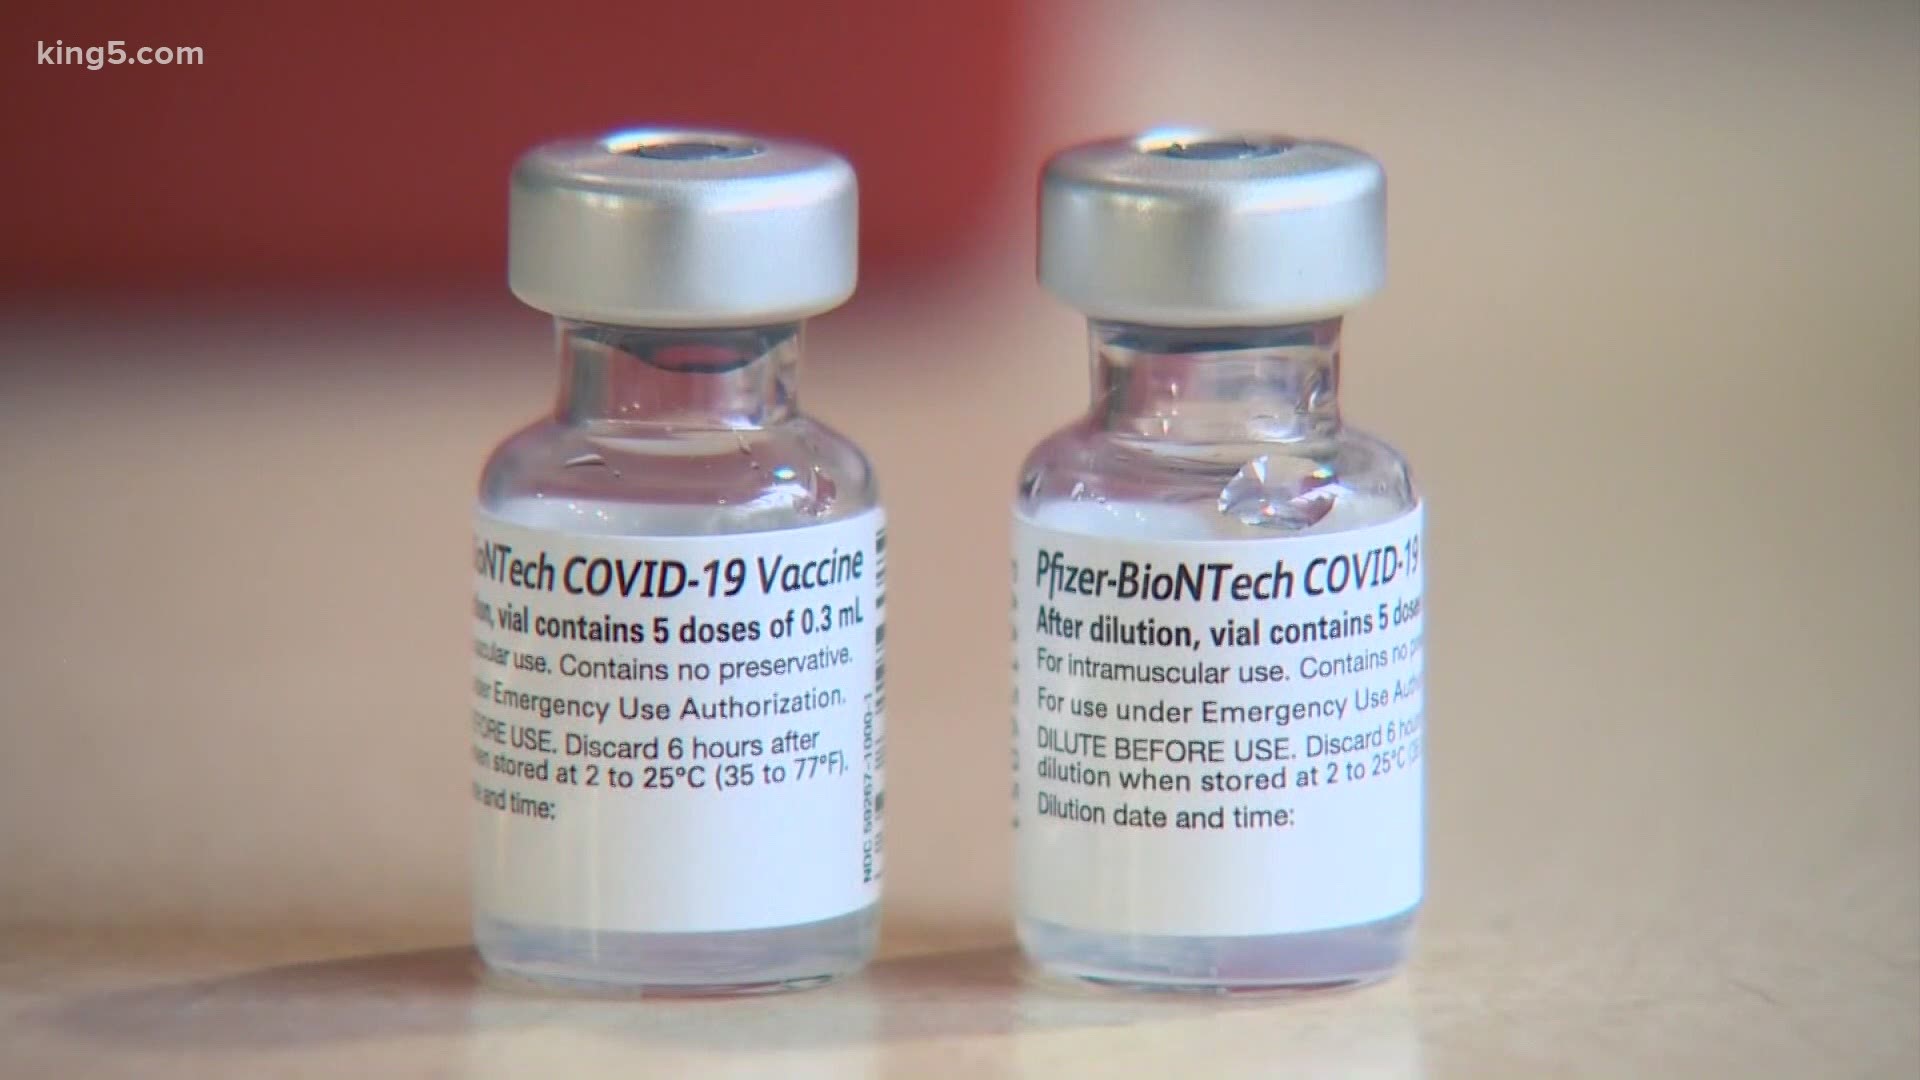 The Washington State Department of Health promised new details in the first week of January on the next phase of COVID-19 vaccine distribution.